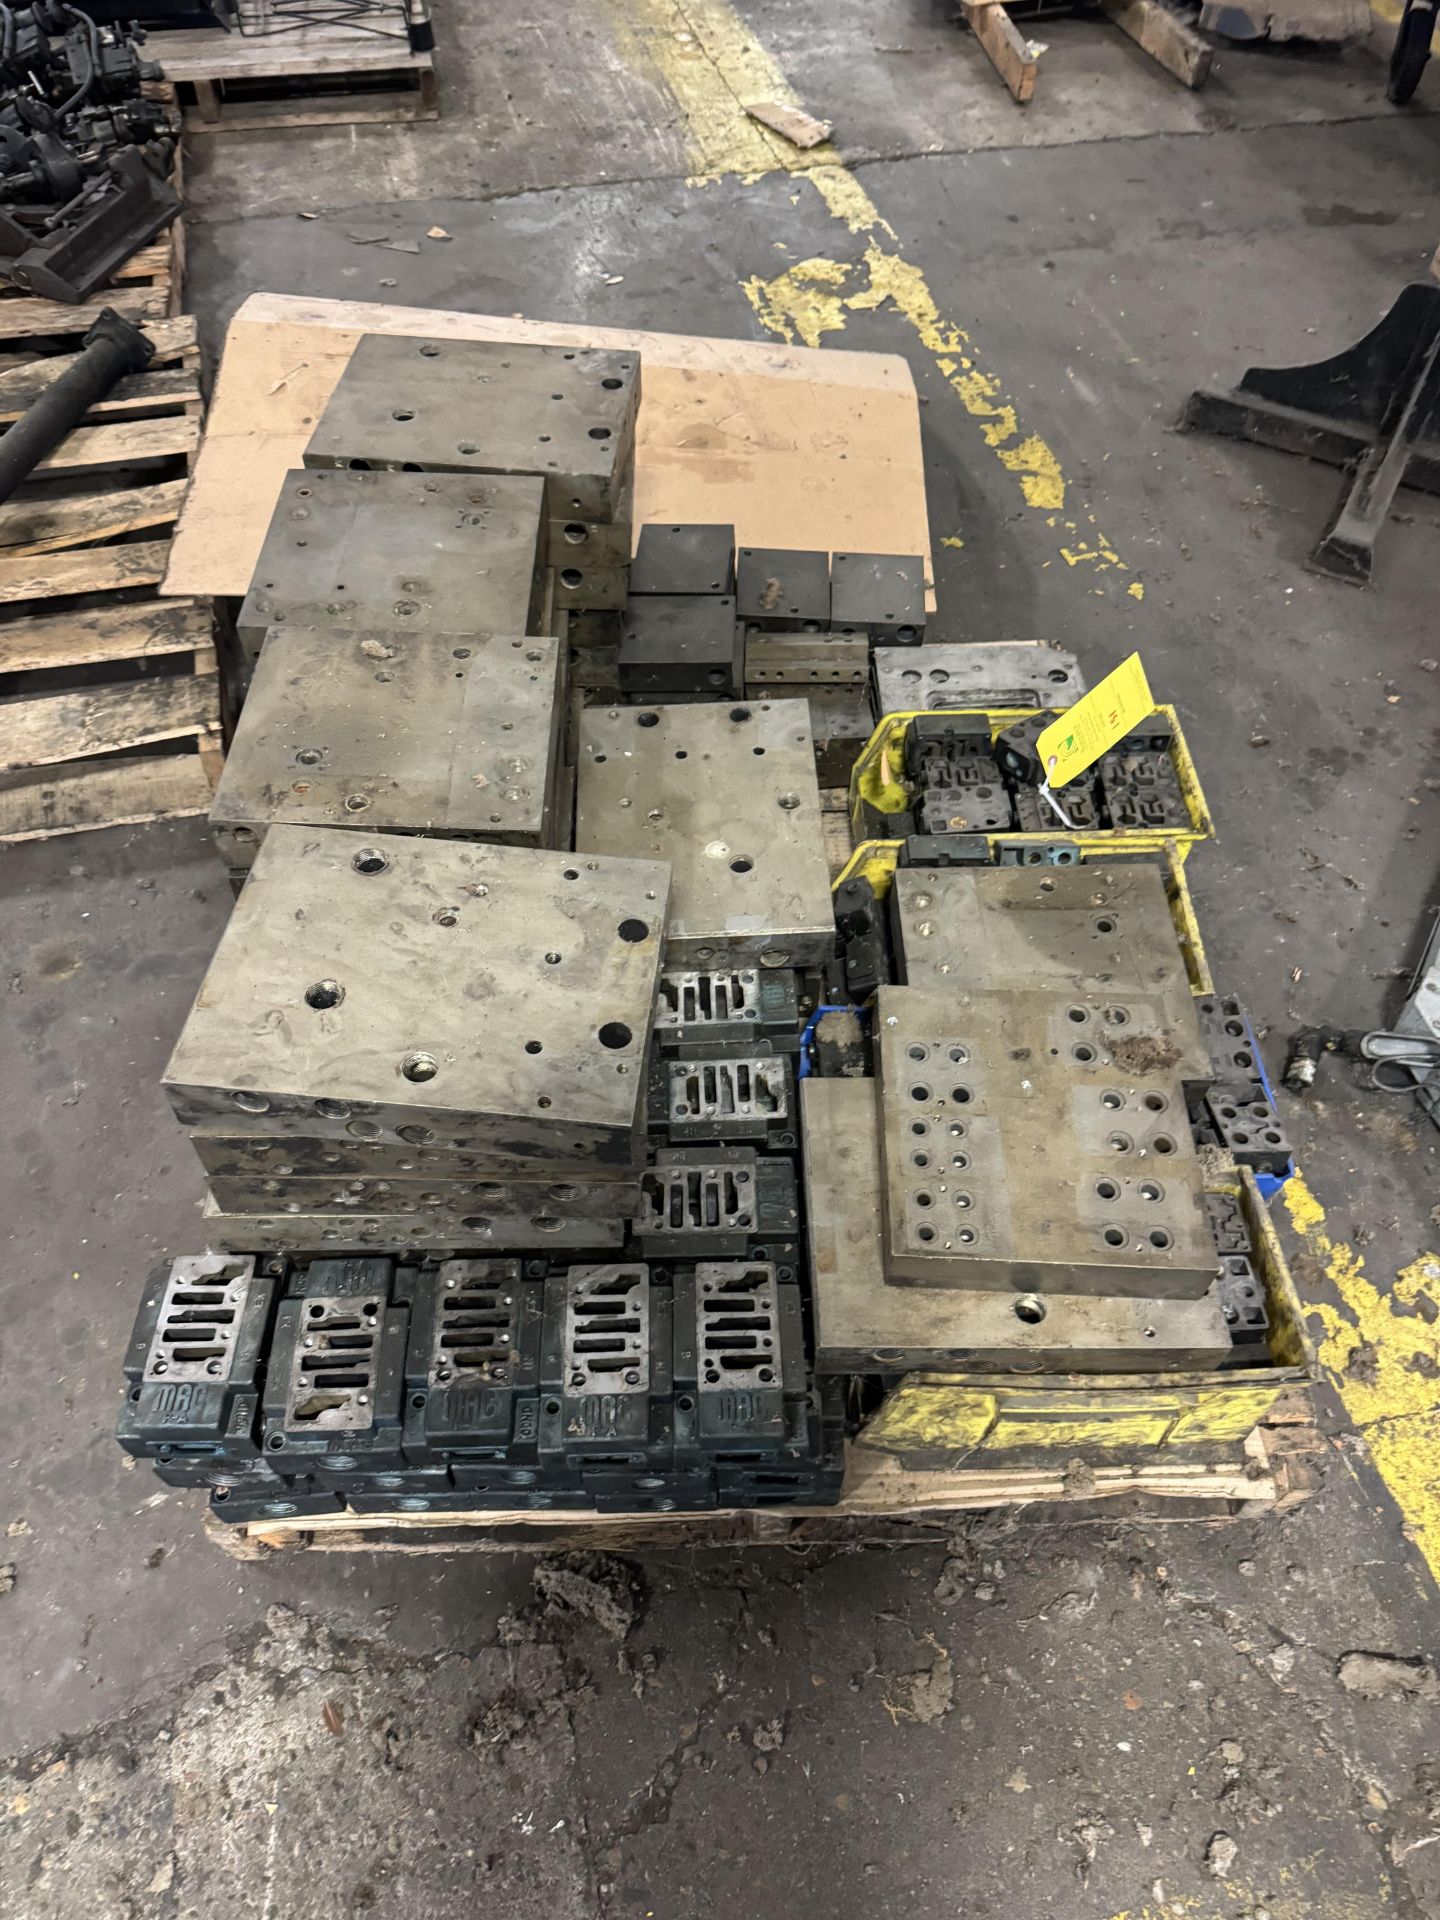 Pallet of Miscellaneous Milled Metal, Rigging/ Removal Fee - $75